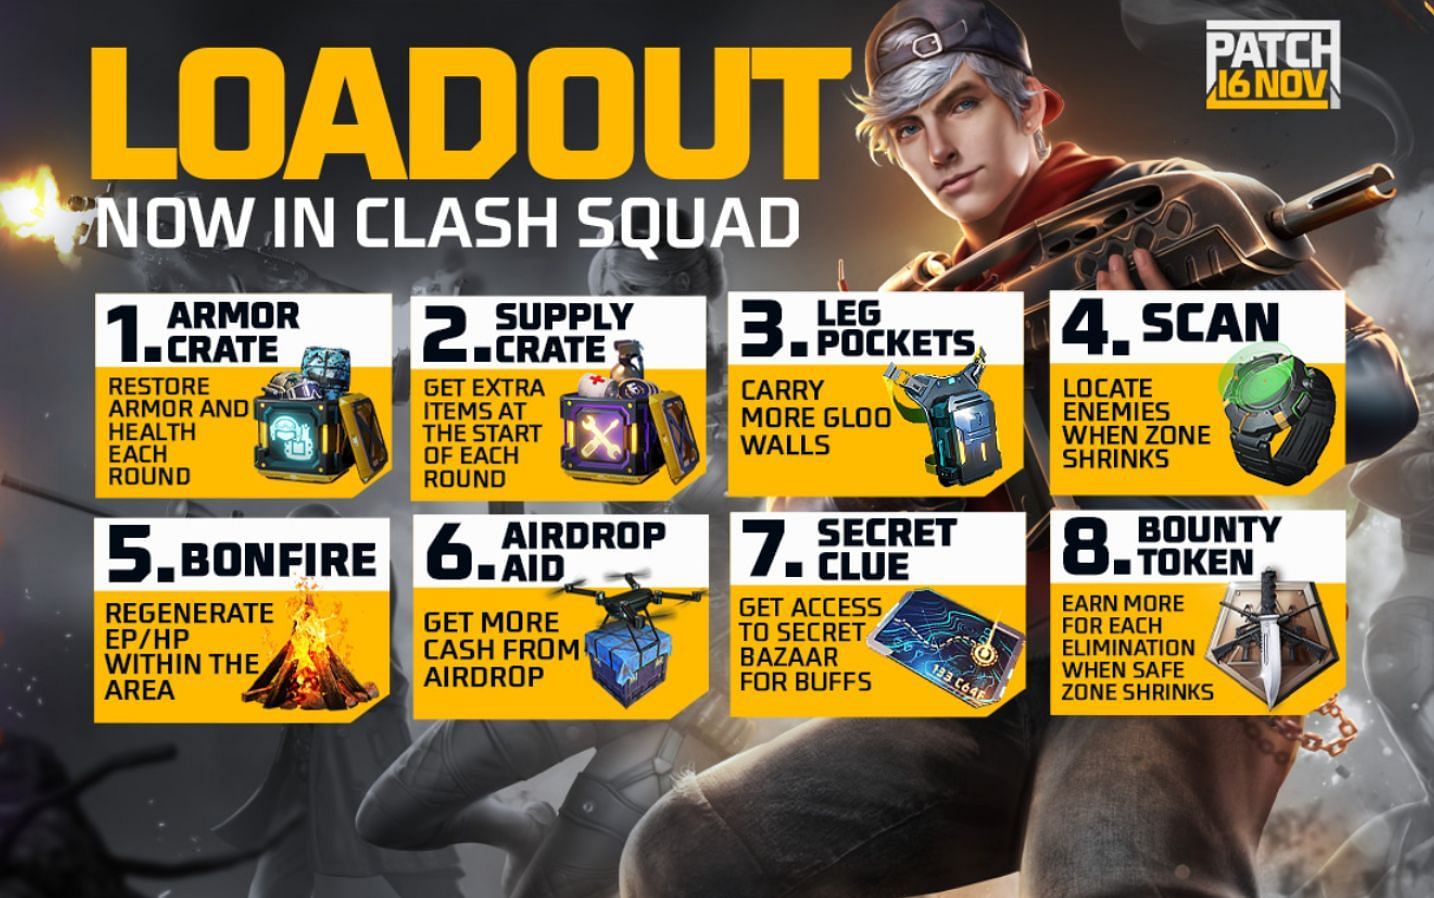 Loadout items will now be a part of Clash Squad mode (Image via Garena)